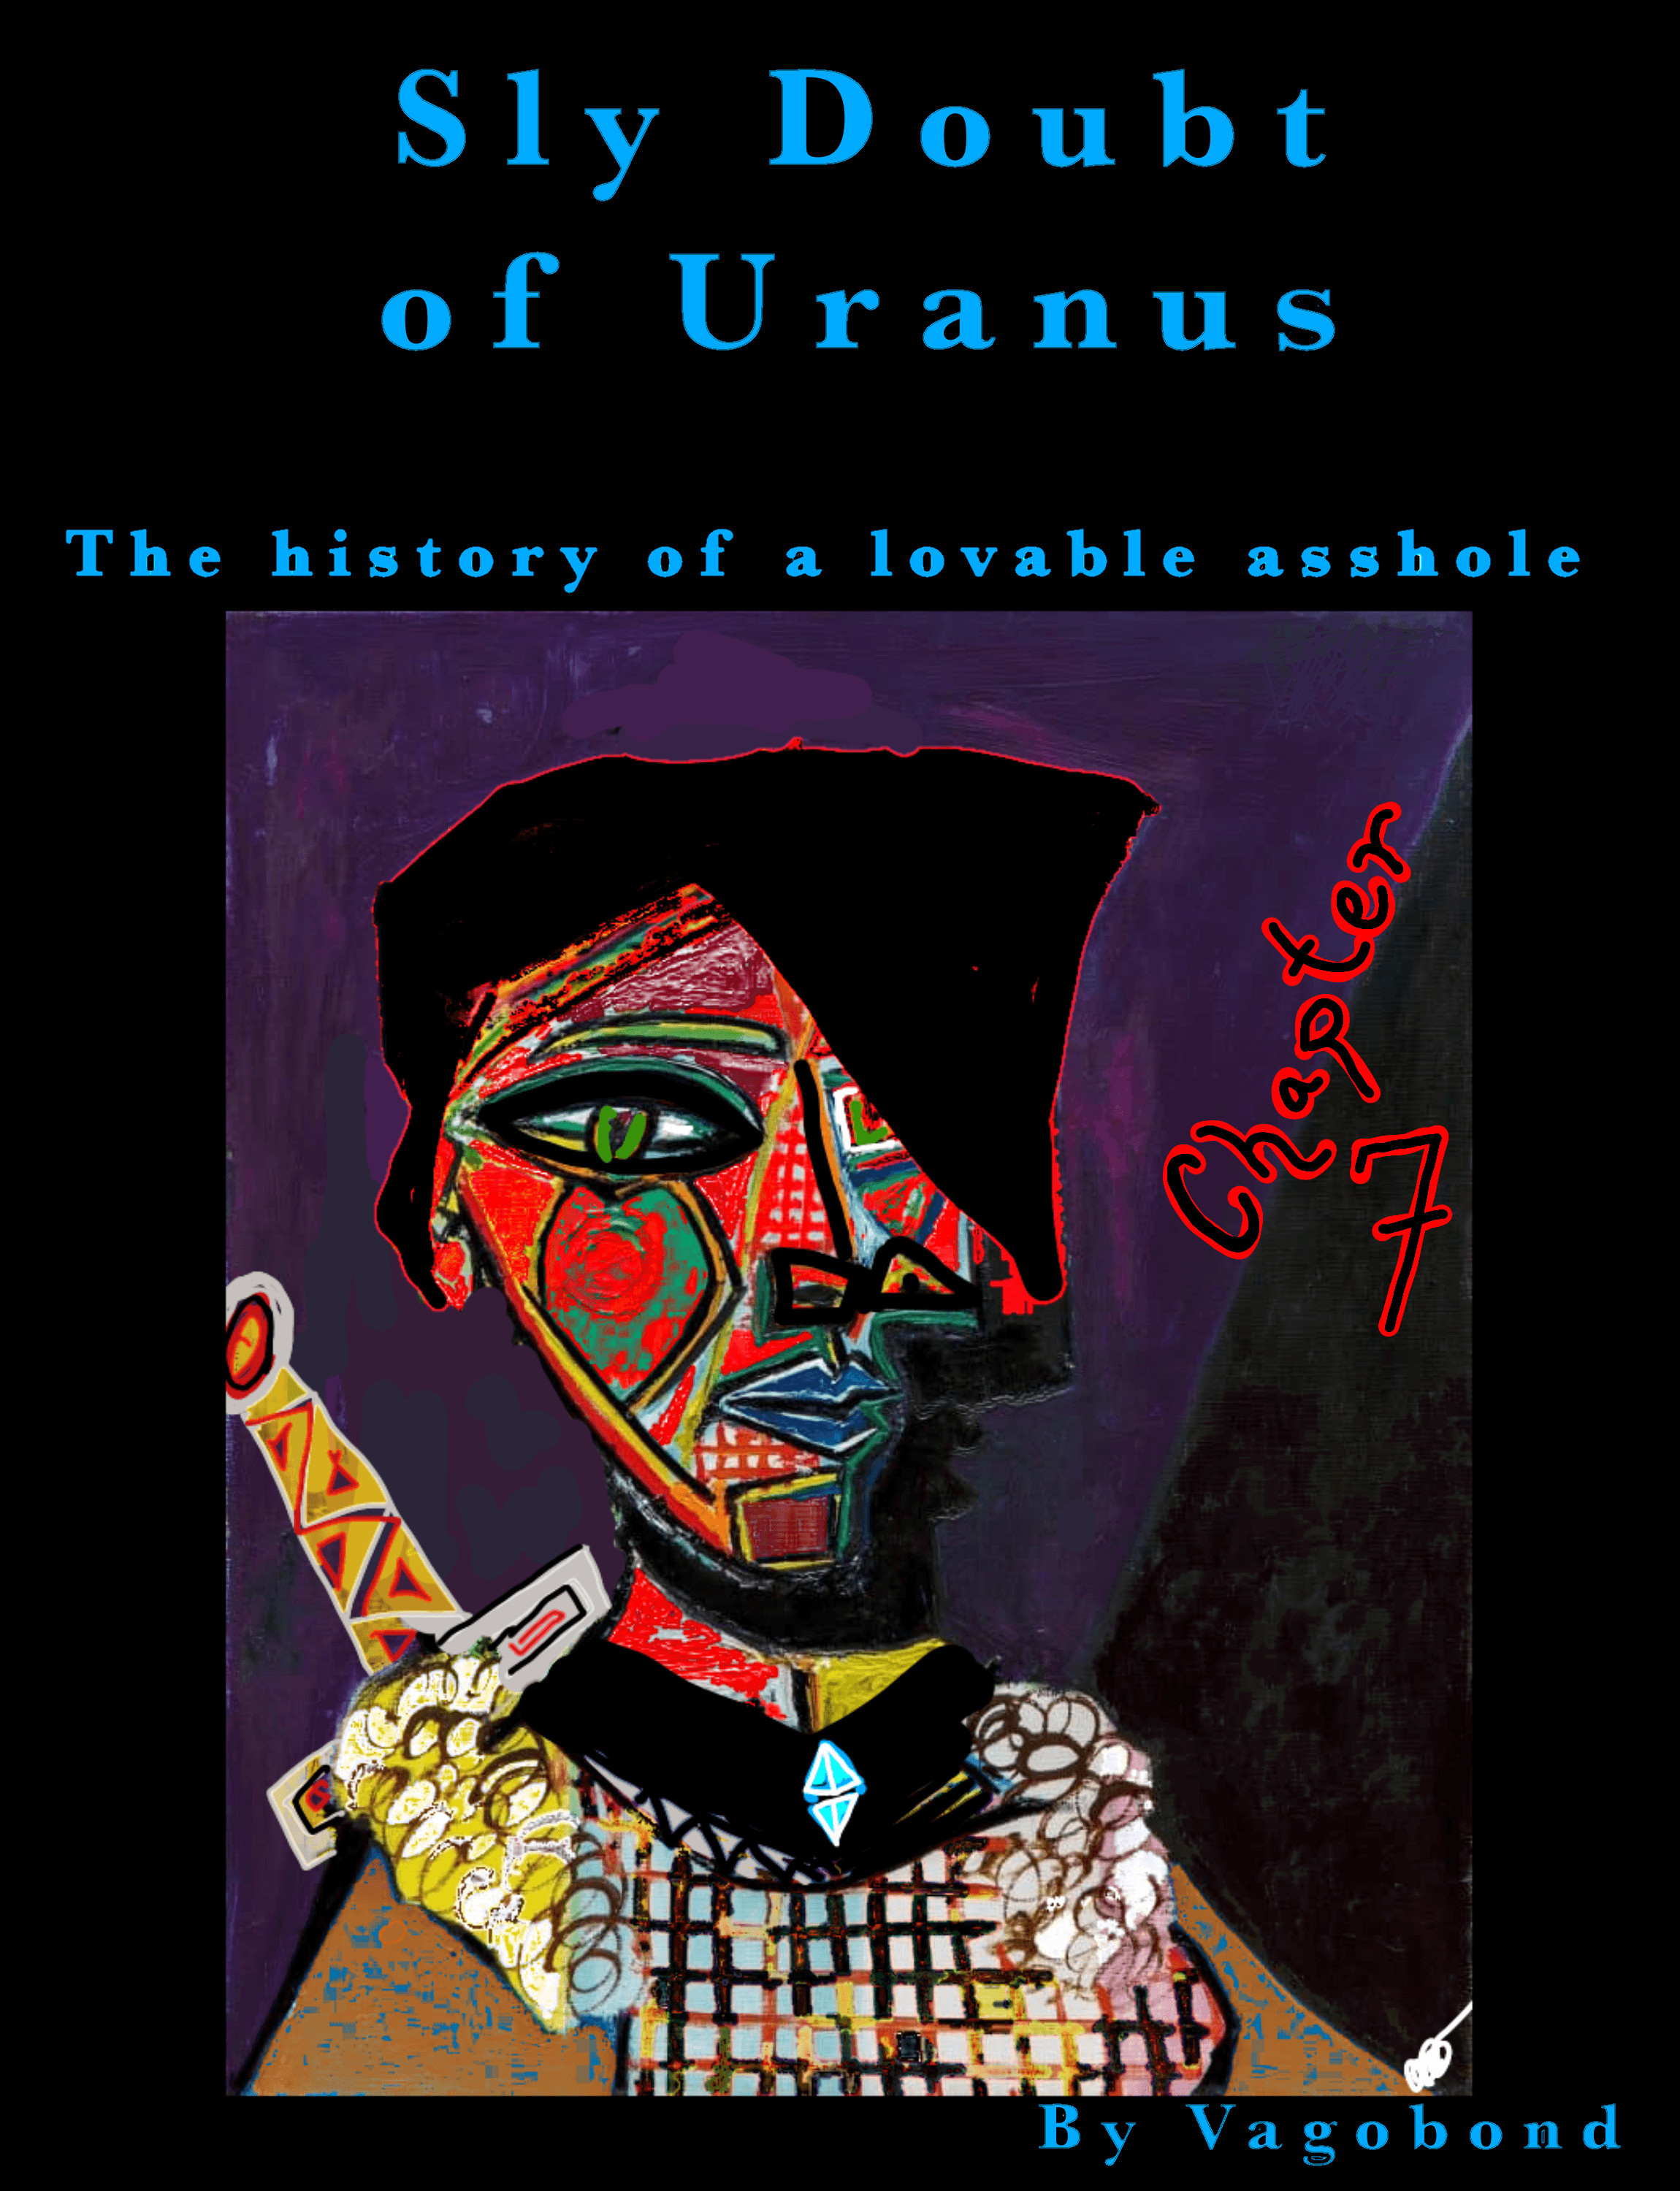 Sly Doubt of Uranus: The History of a Lovable Asshole - Chapter 7: 1st Edition